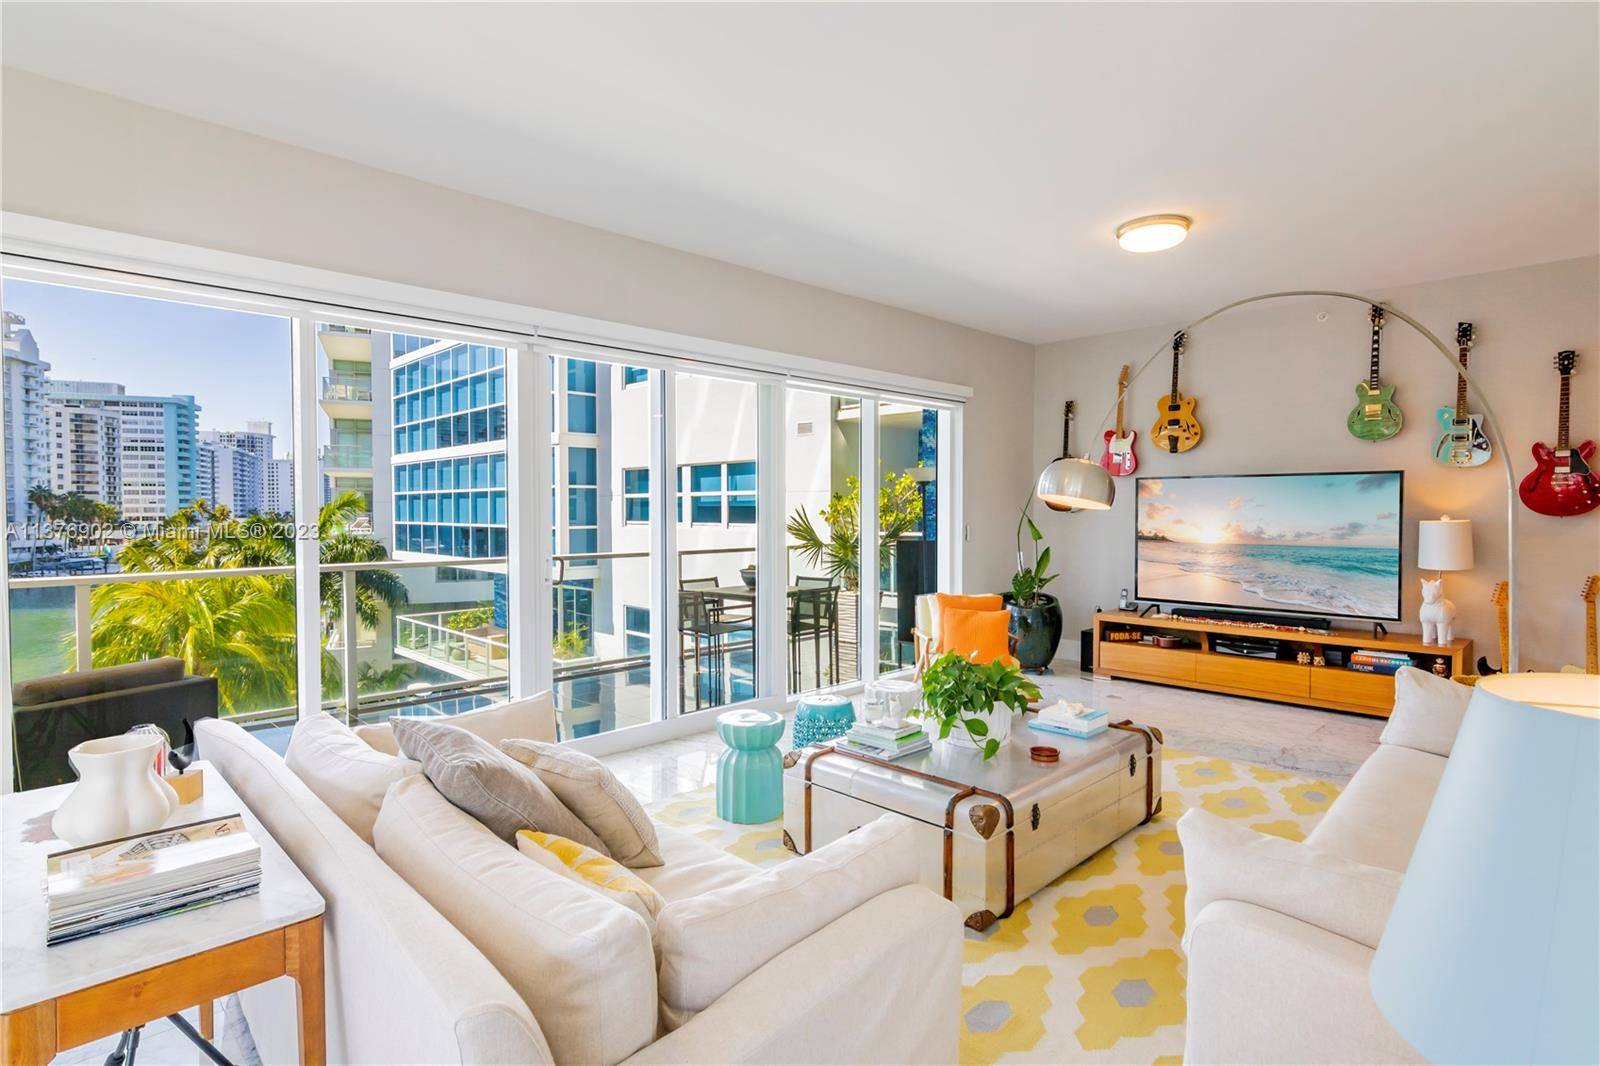 Exquisite living at one of the most prestigious private islands in the heart of Miami Beach.